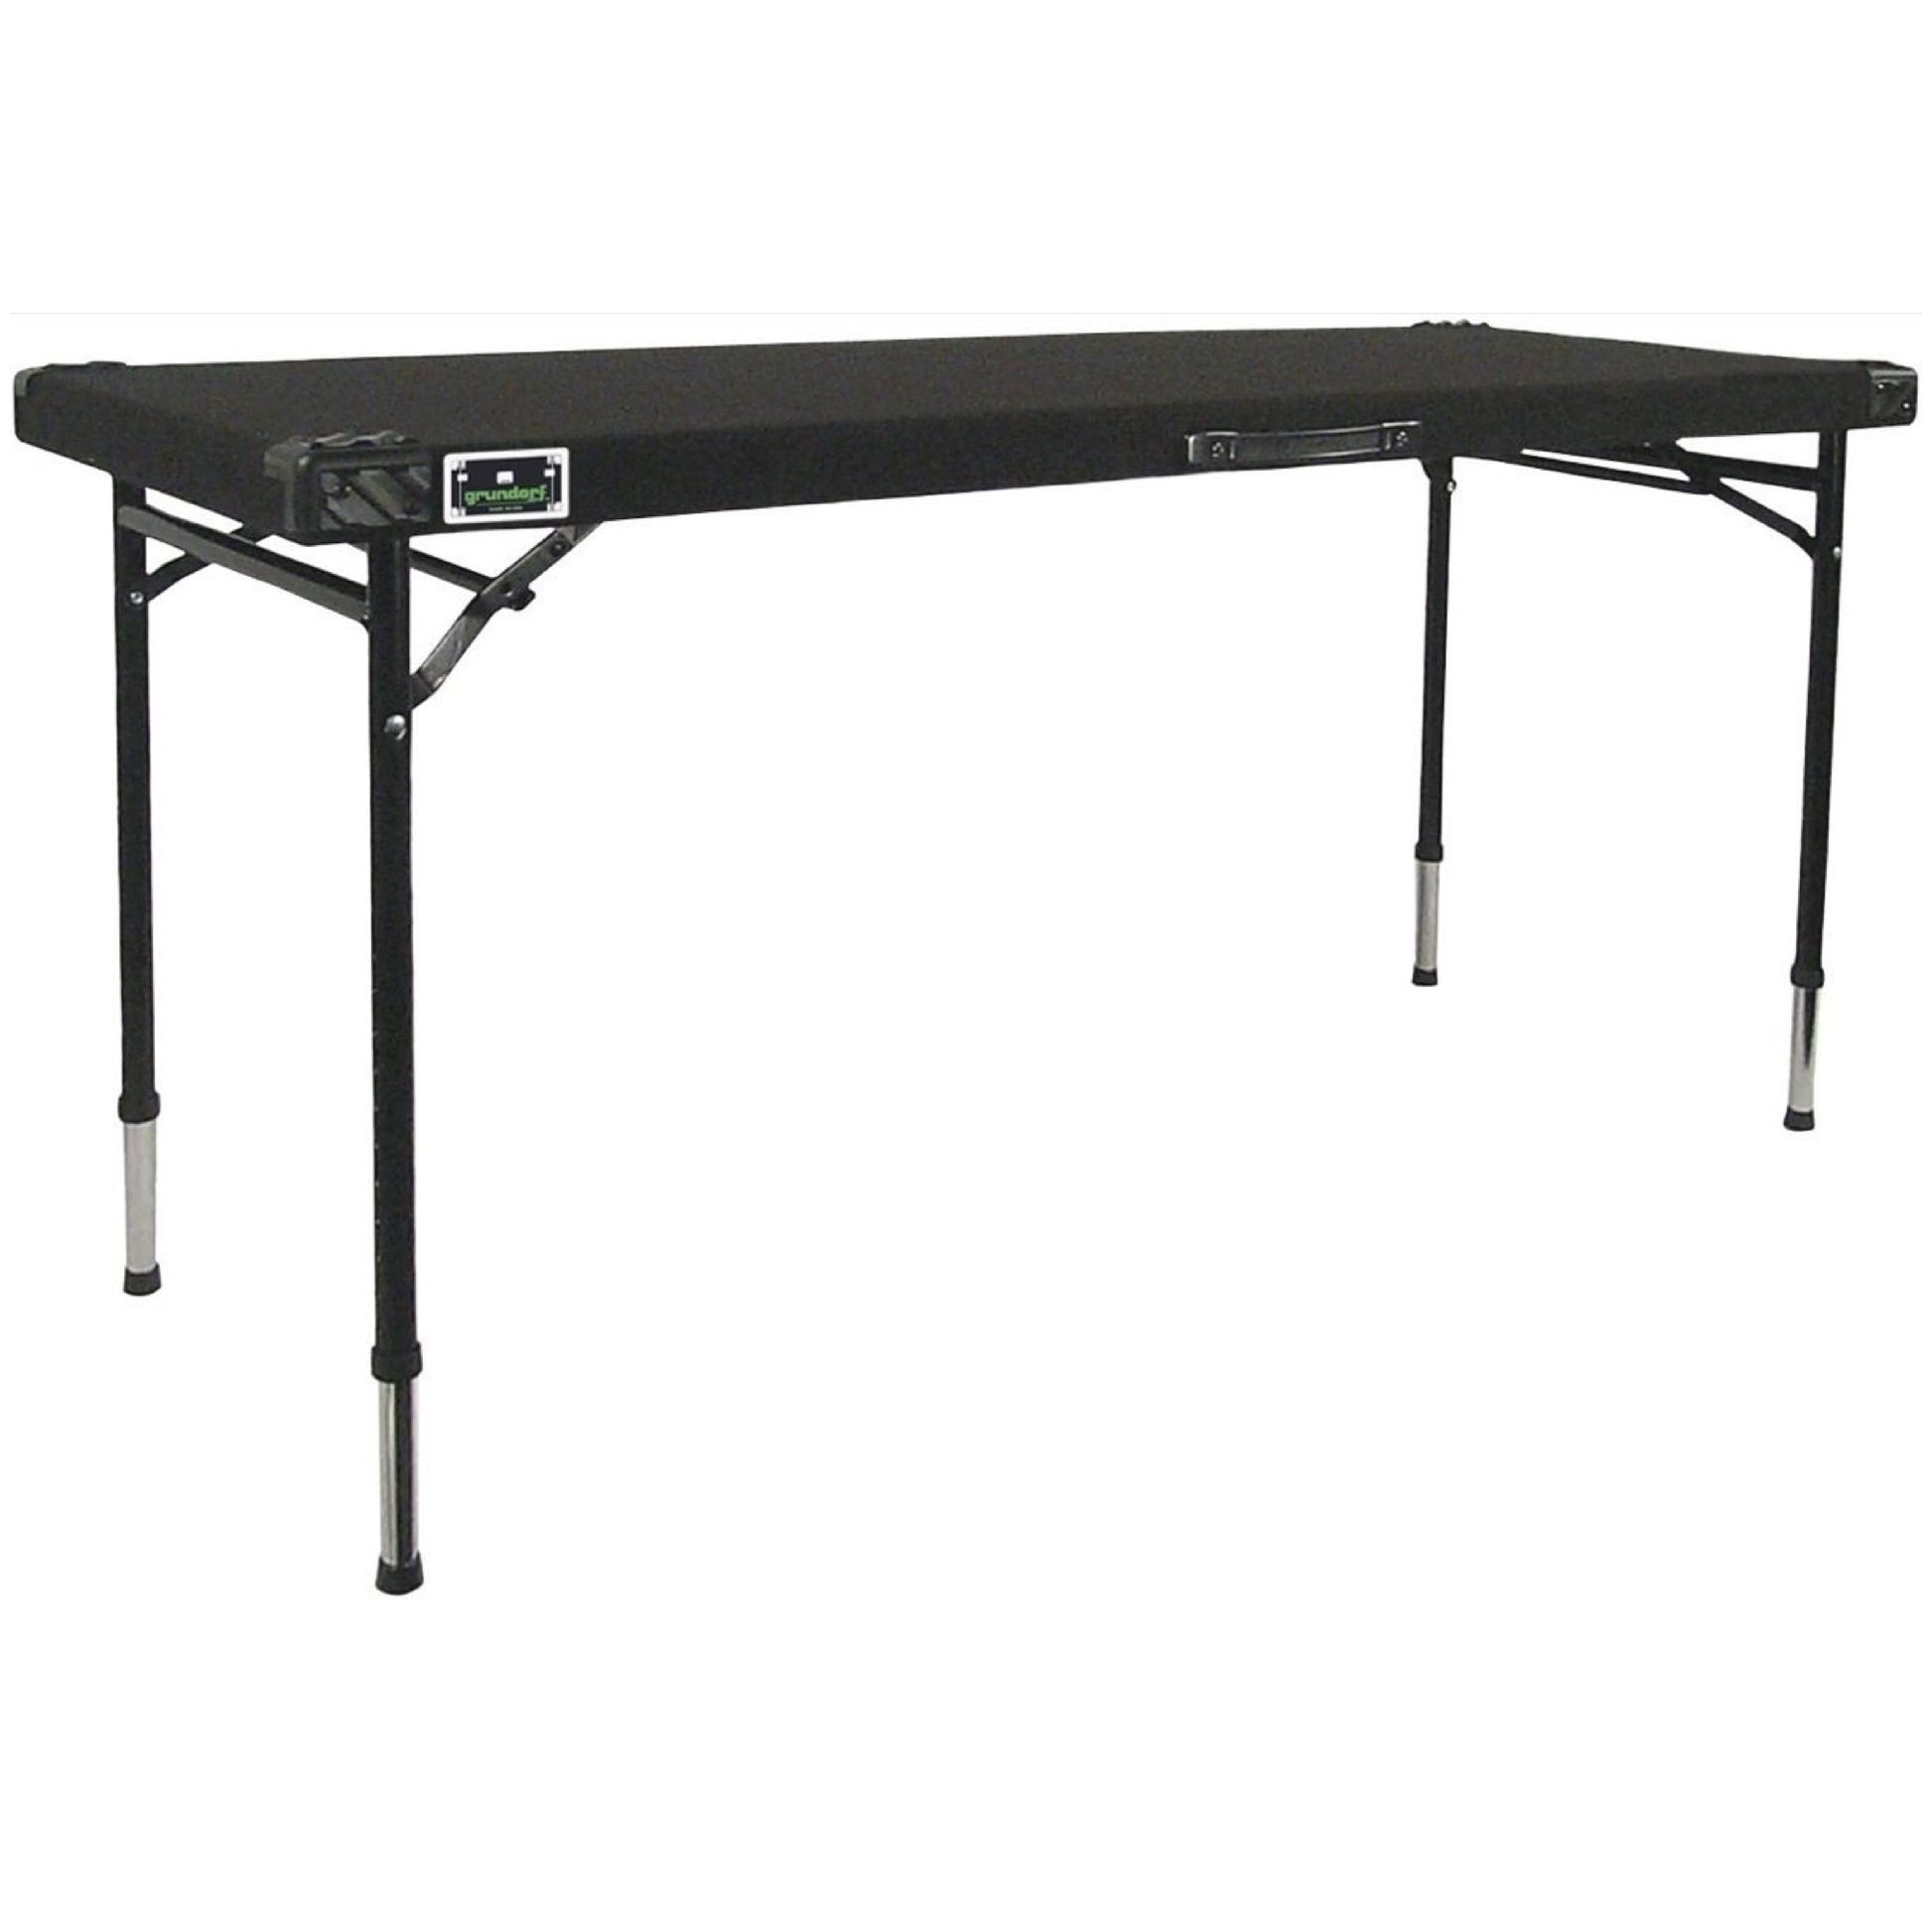 Grundorf AT-6022 Carpeted Facade Table, Black, 60x22 Inch